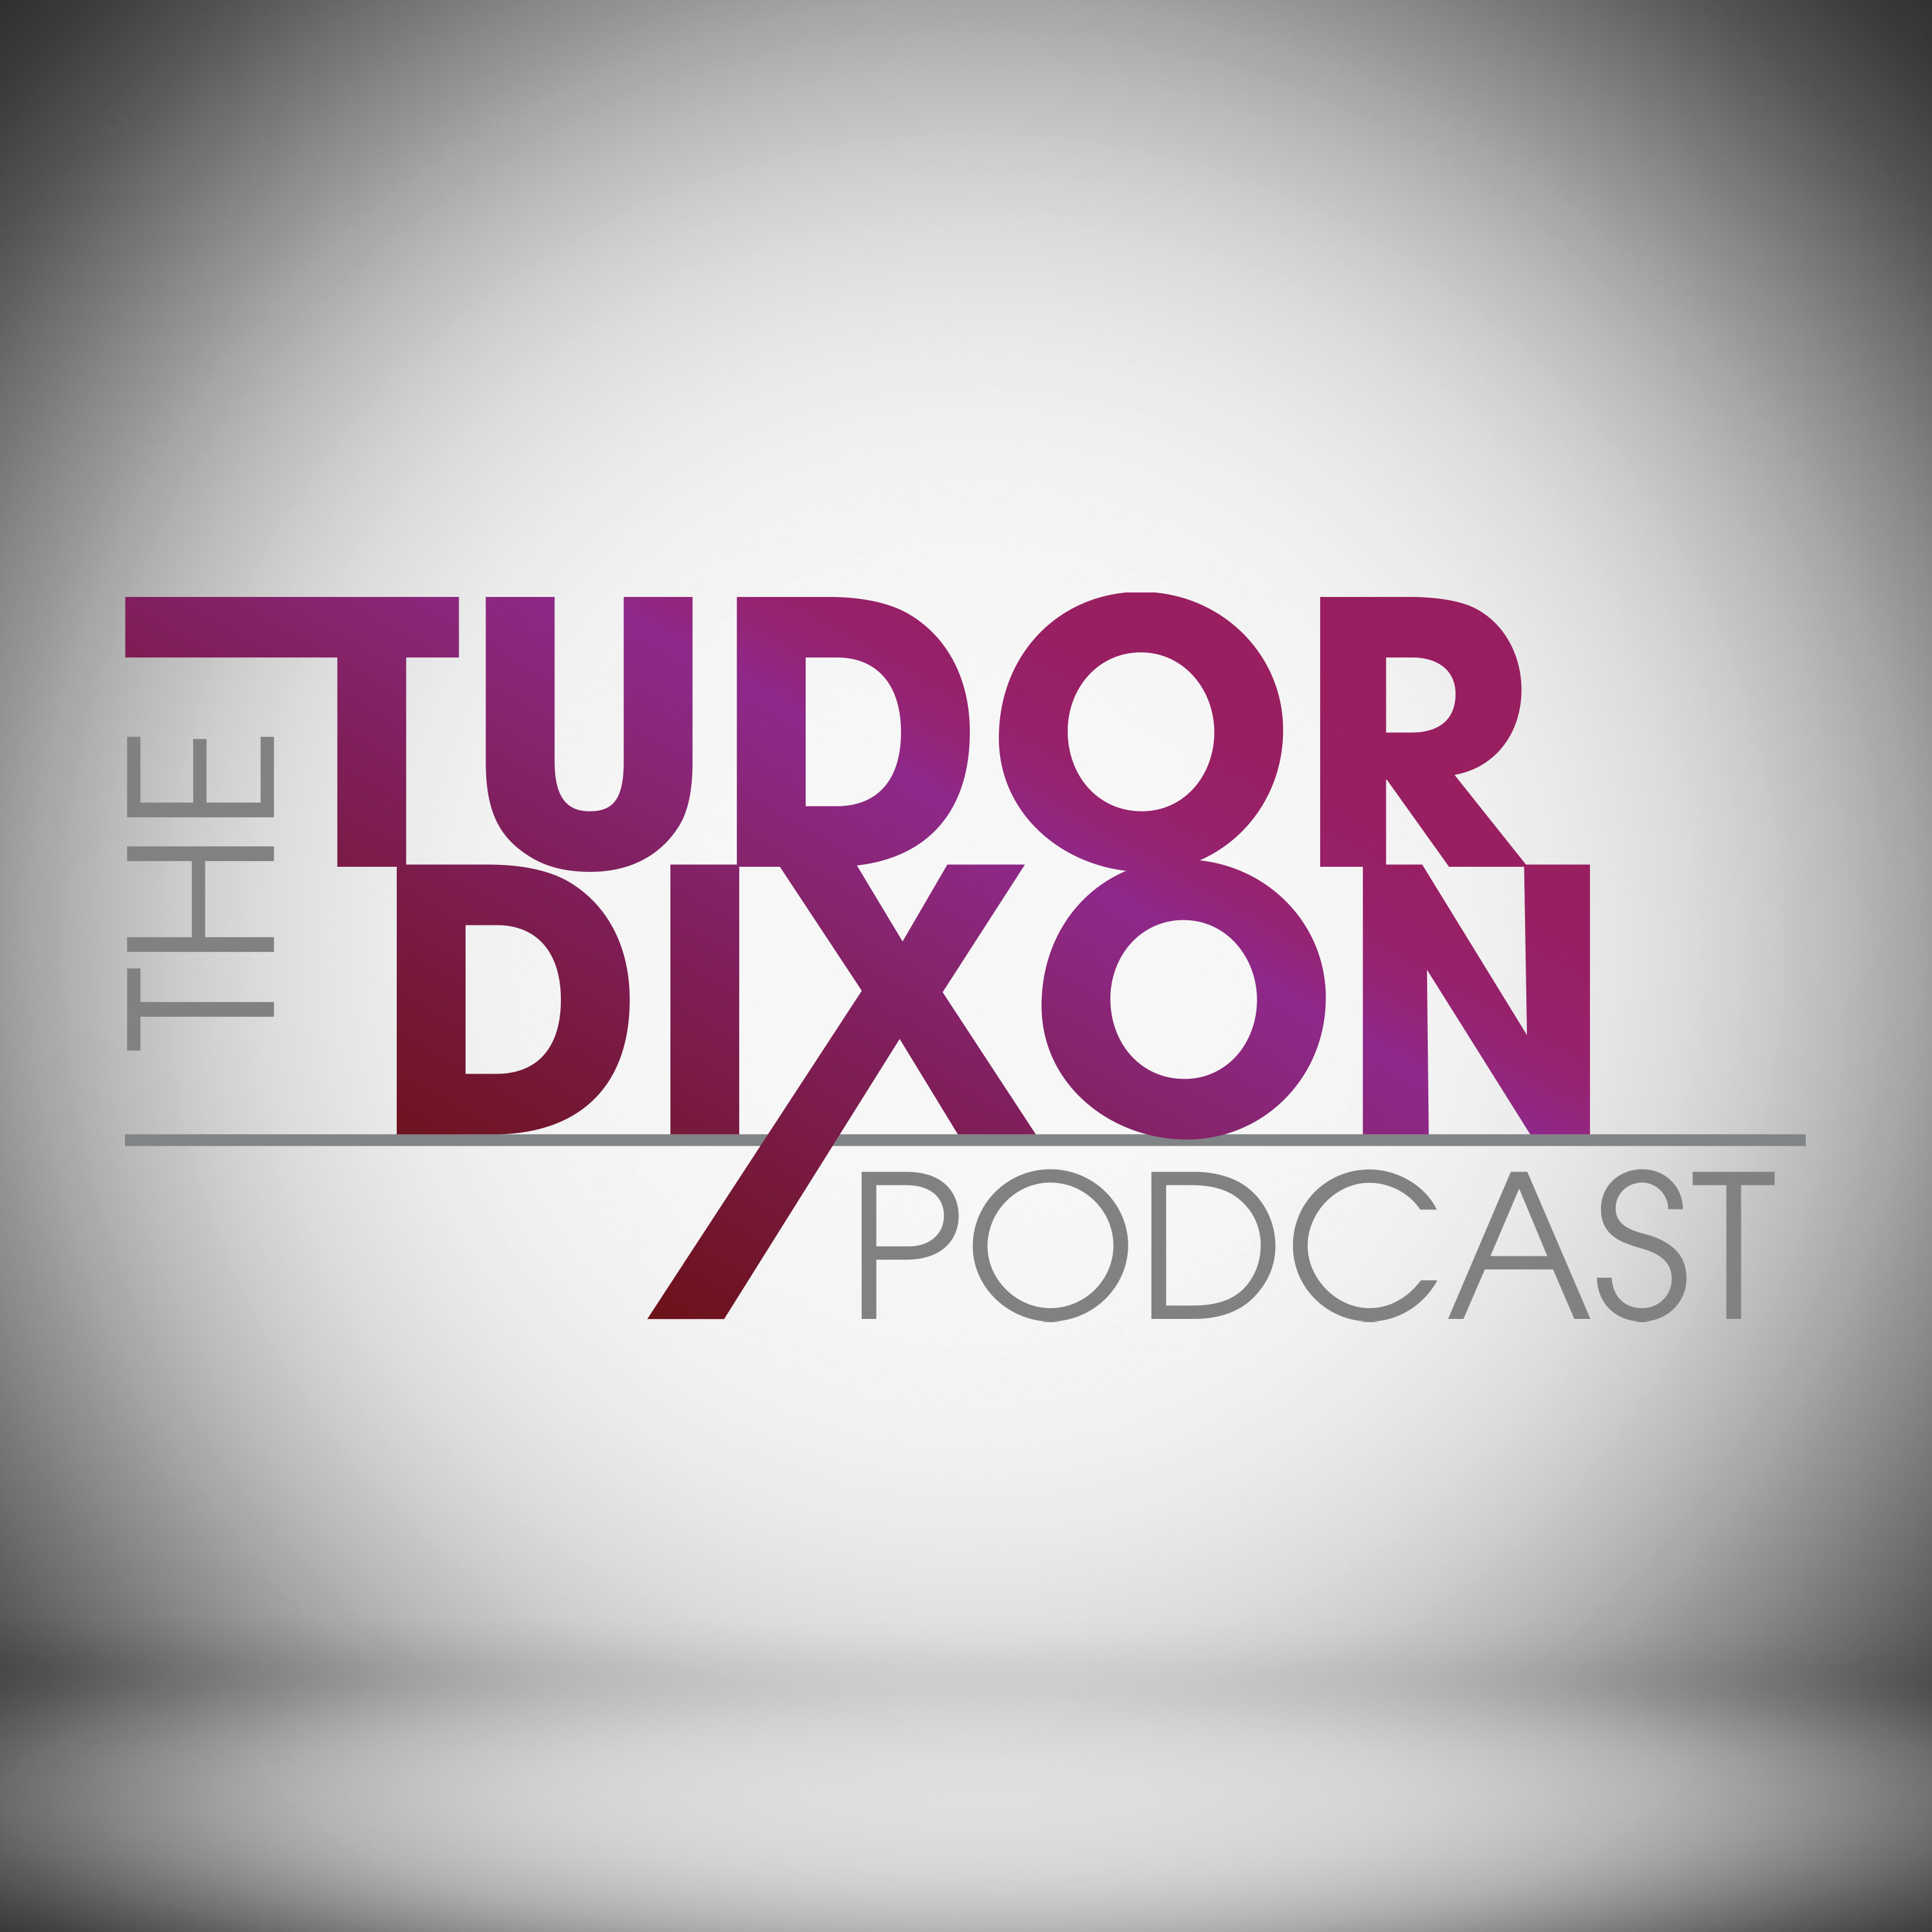 The Tudor Dixon Podcast: Raising Healthy Teenagers with Tom Kersting